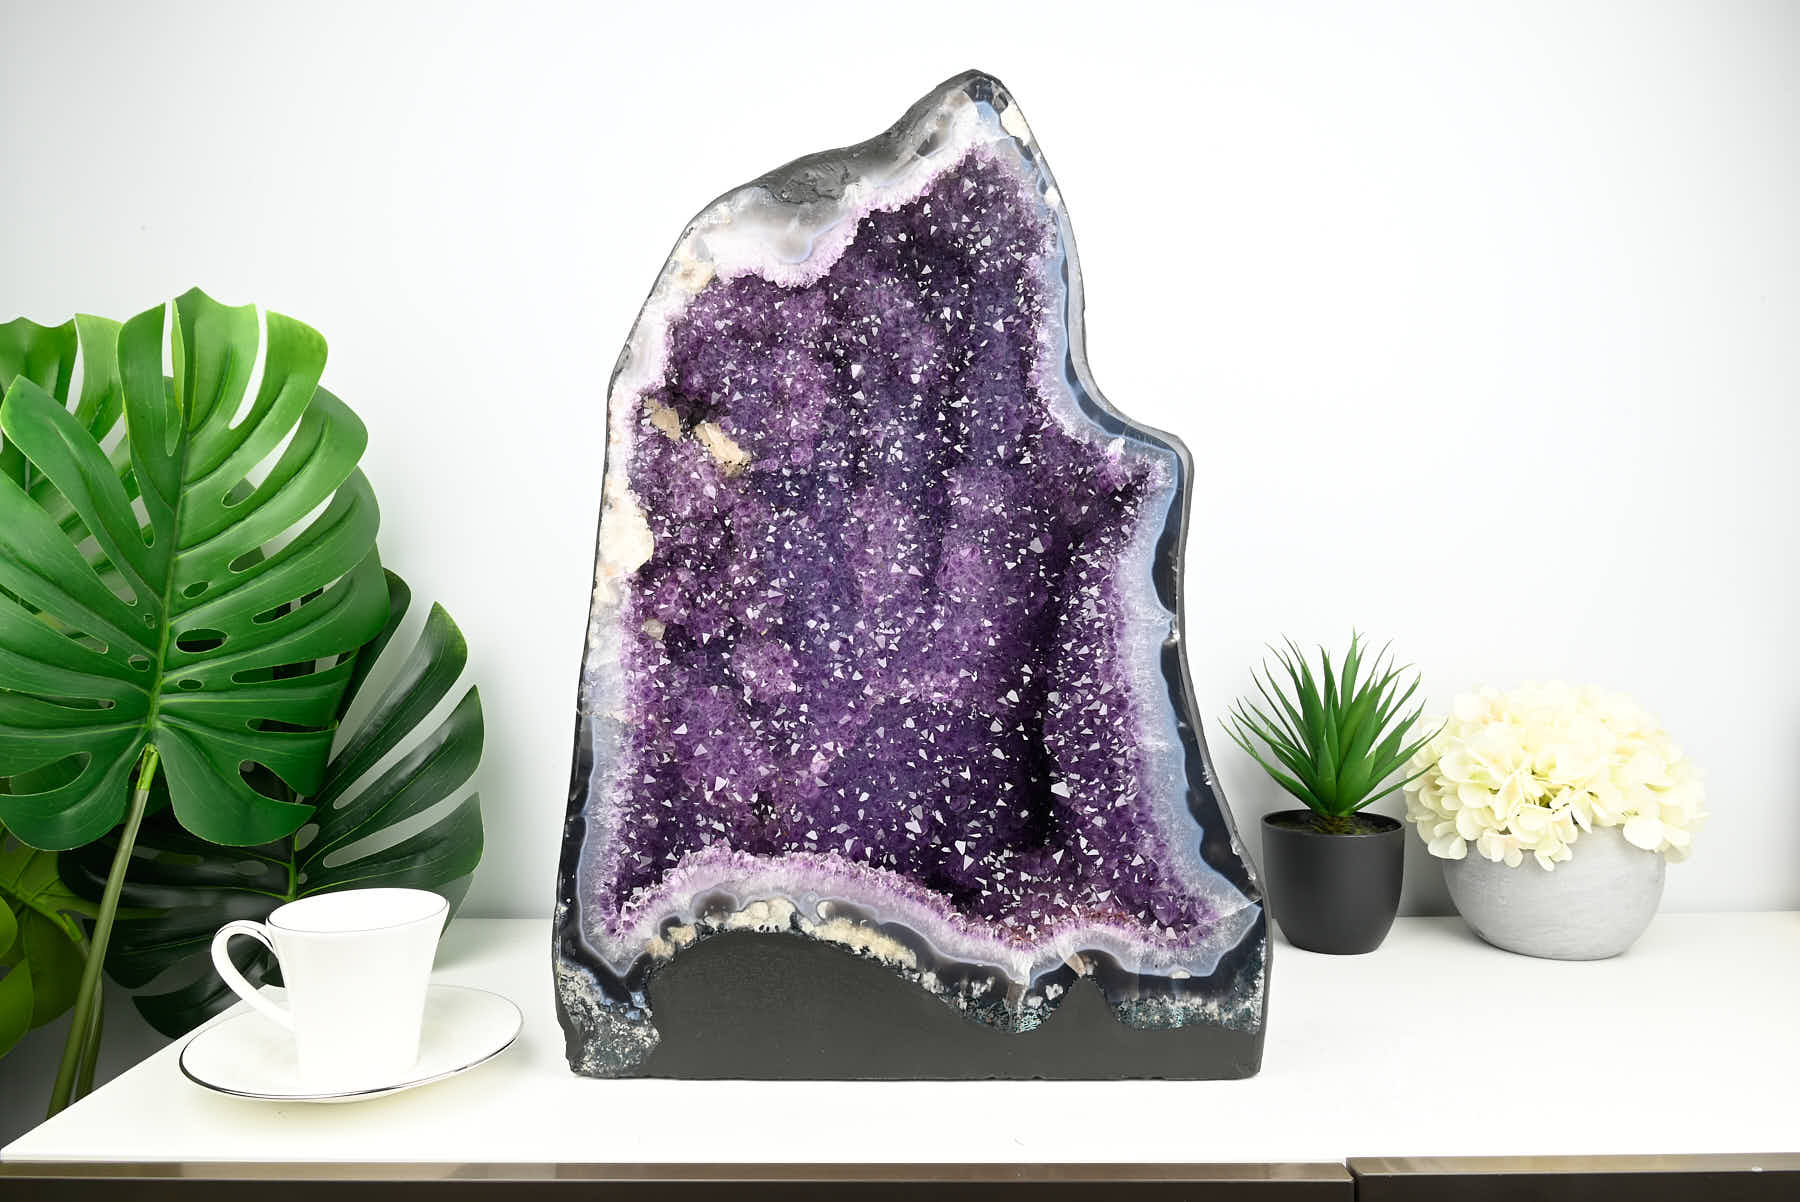 Extra Quality Amethyst Cathedral - 31.48kg, 52cm tall - #CAAMET-10043